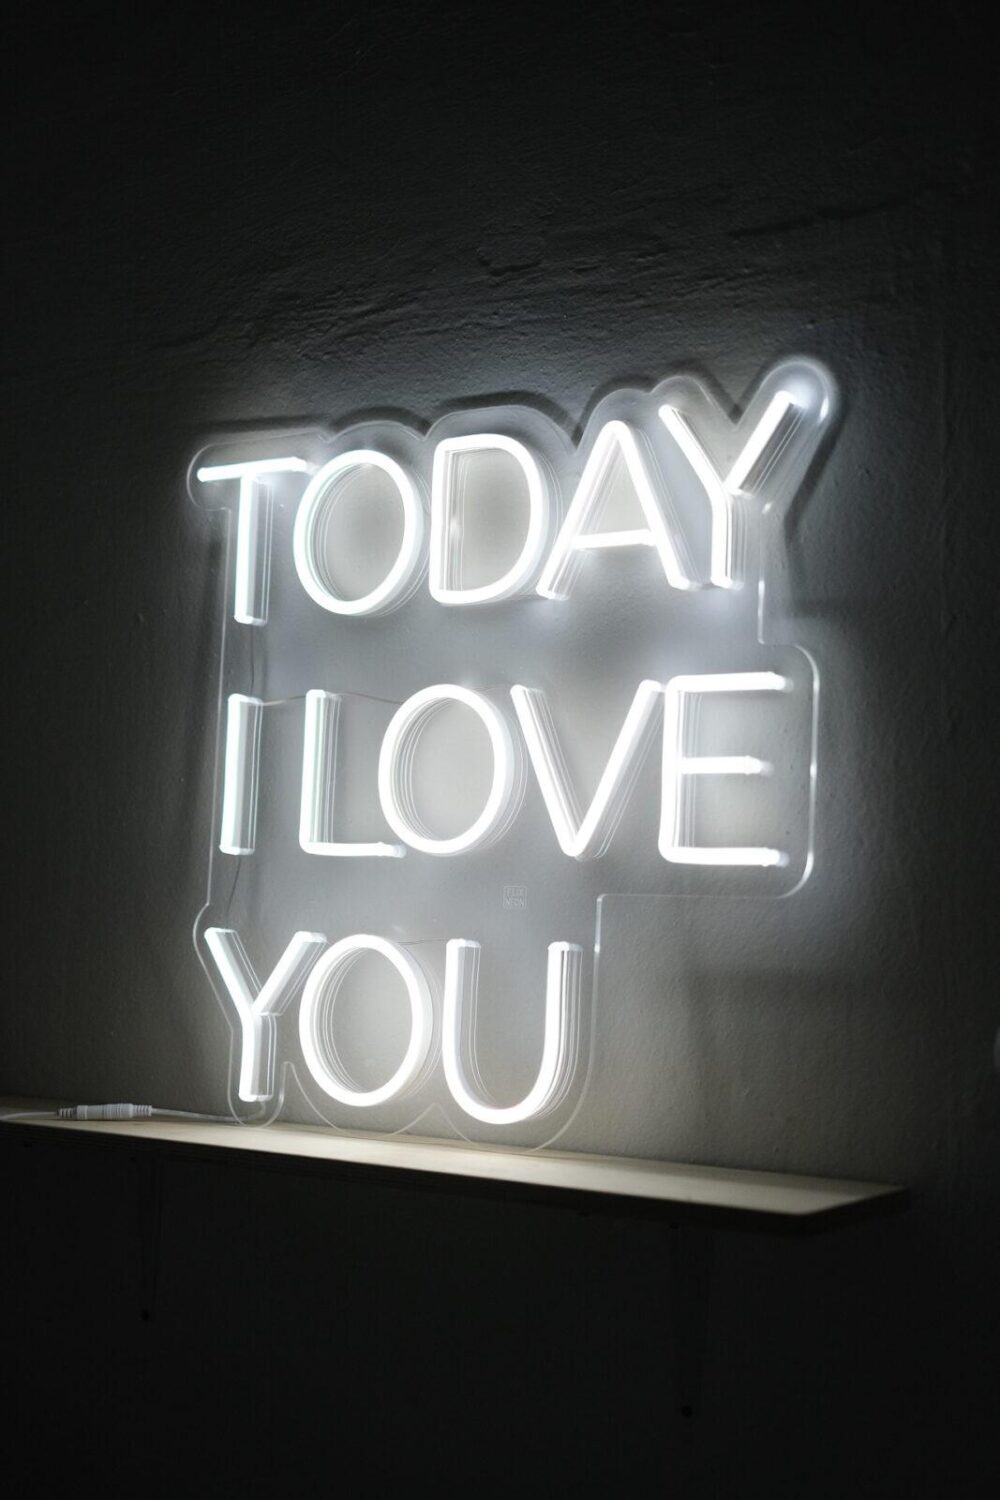 Today i love you